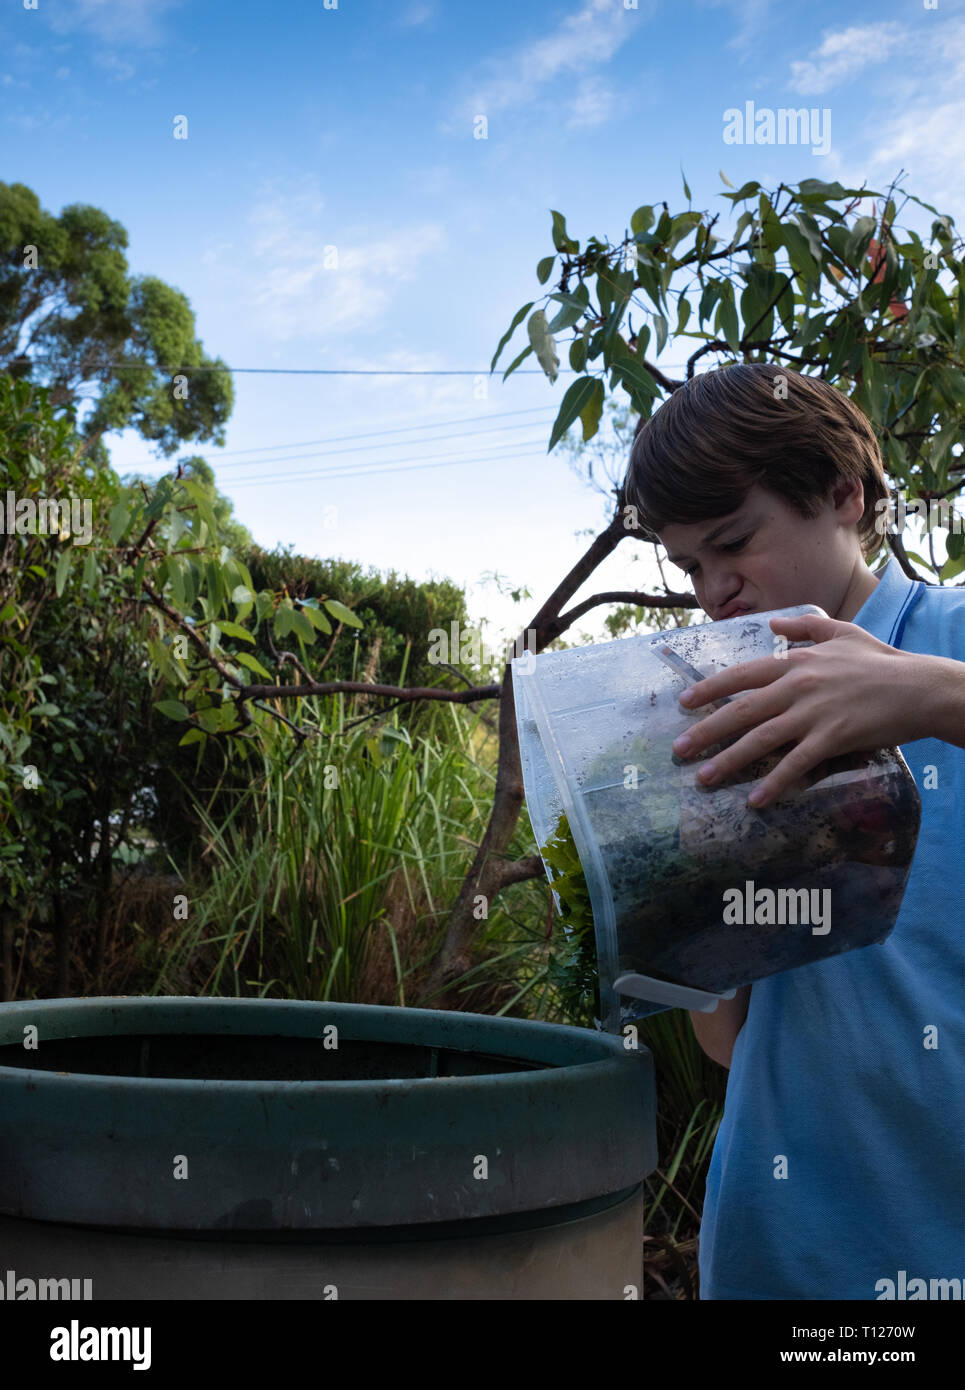 Primary school aged child tipping food scraps into the compost bin. Stock Photo